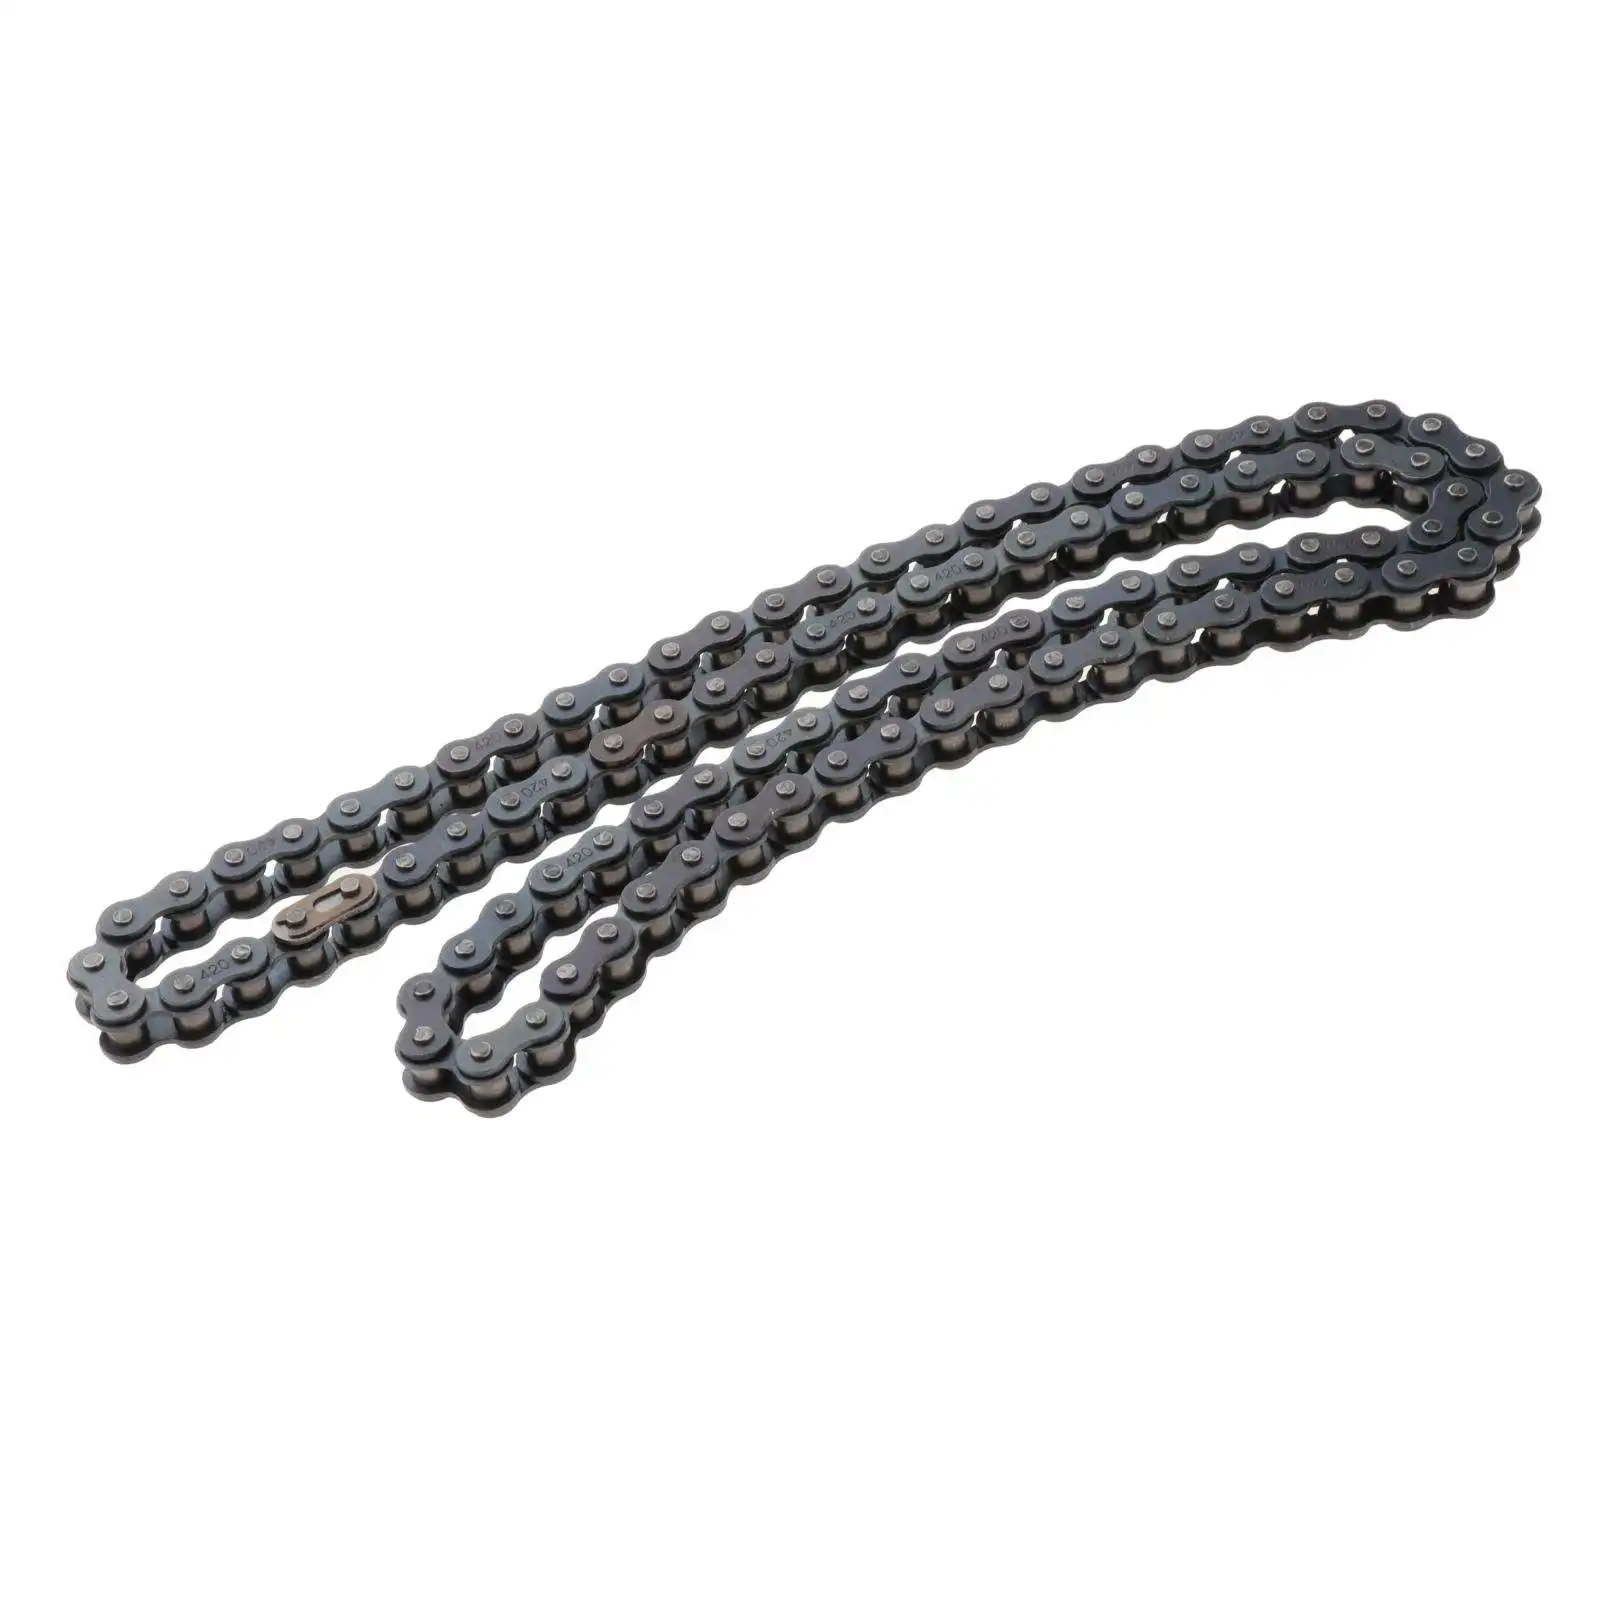 Steel 420 Motorcycle Chain 50-110Cc Roller 420 Standard Roller Chain for ATV Quad Scooter Go Kart Motorcycle Dirt Pit Bike